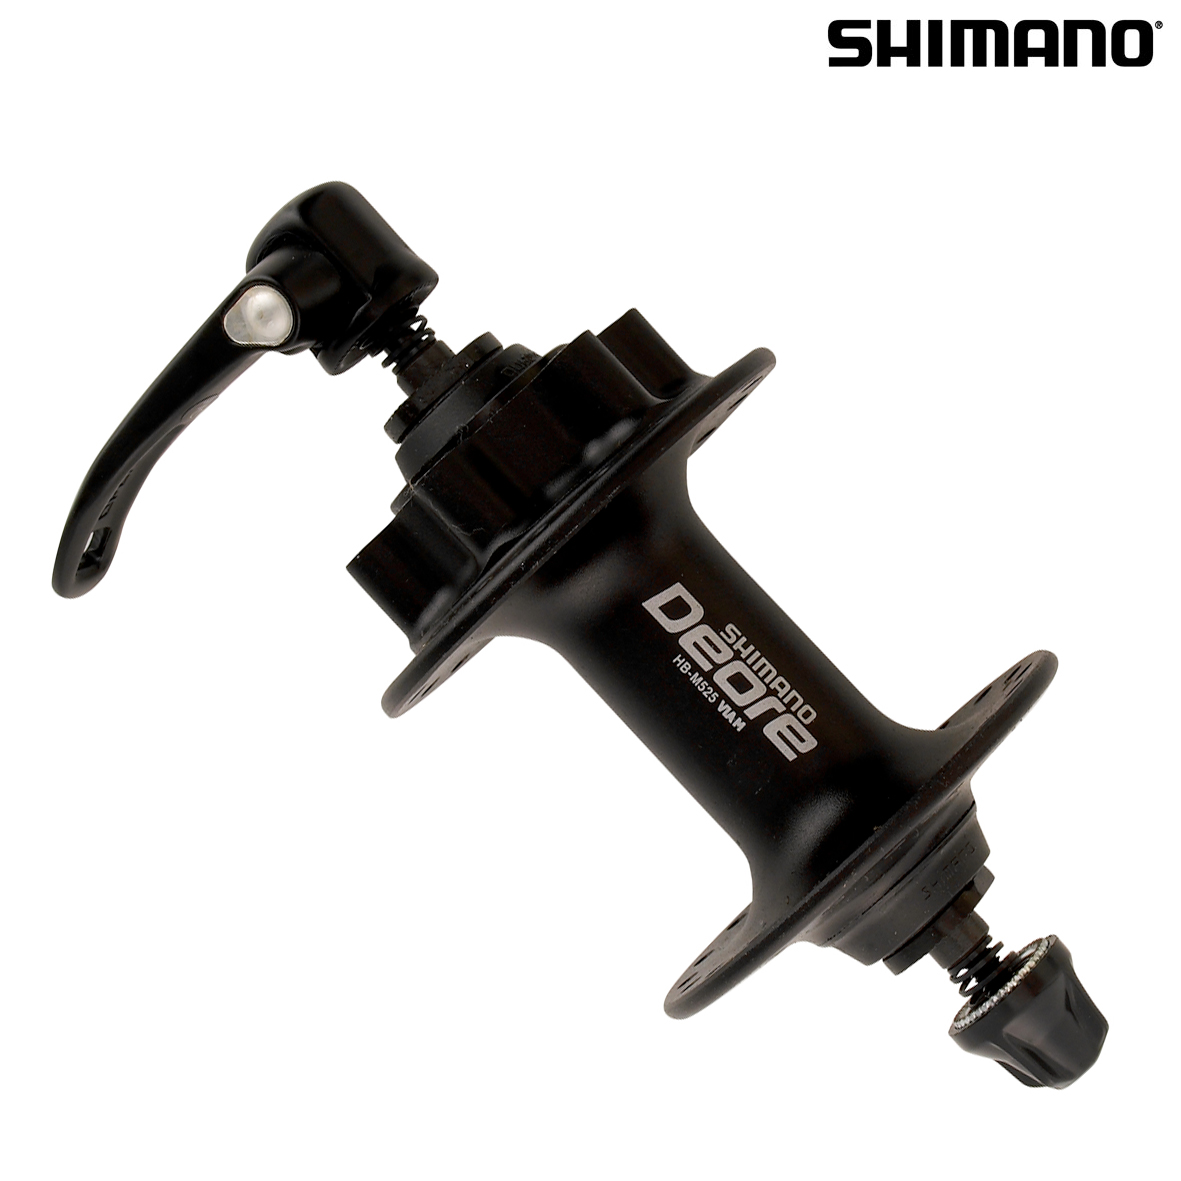 Shimano Deore M525A 32 36H  6-Bolt Disc Hub Front Rear Quick Release Skewer